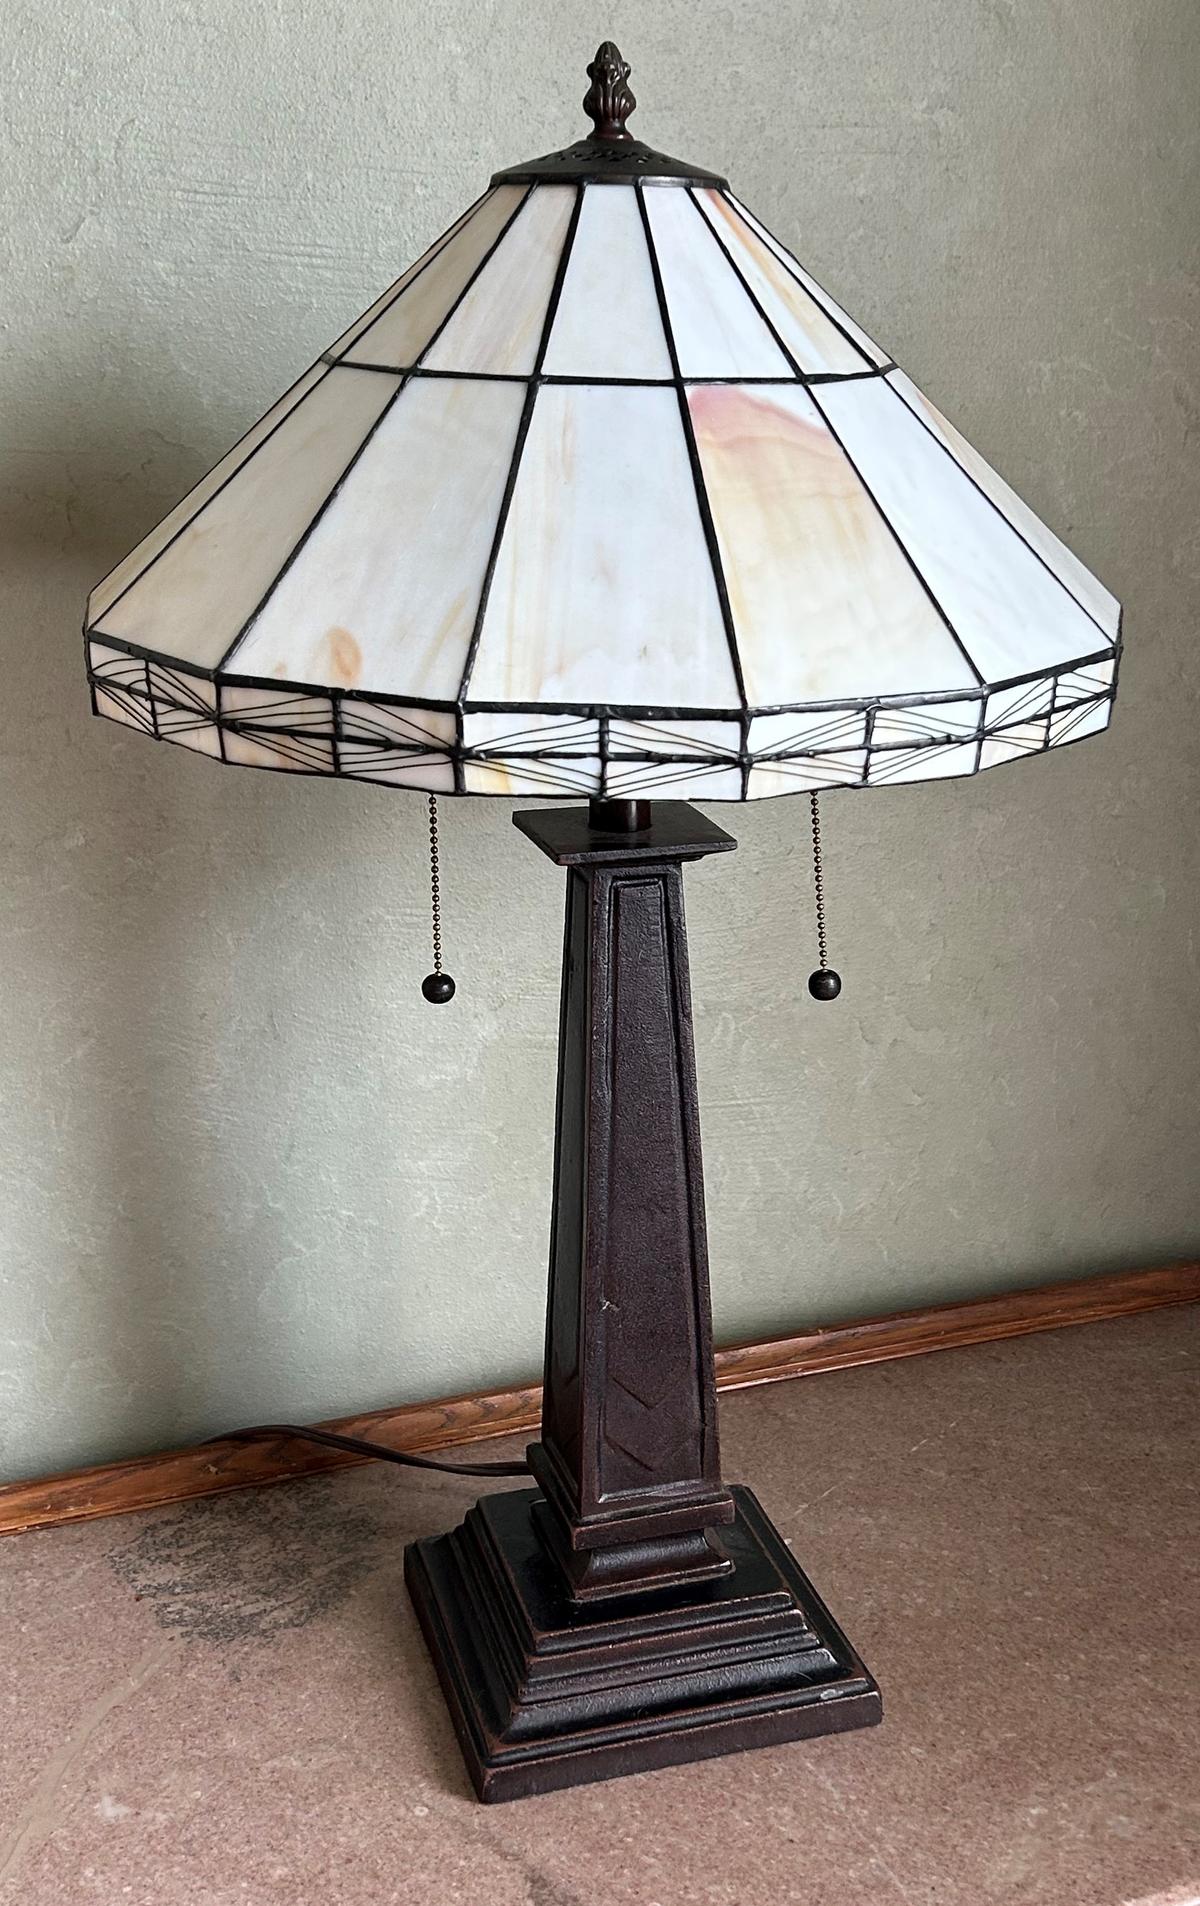 NEWER LAMP WITH SLIDE GLASS SHADE